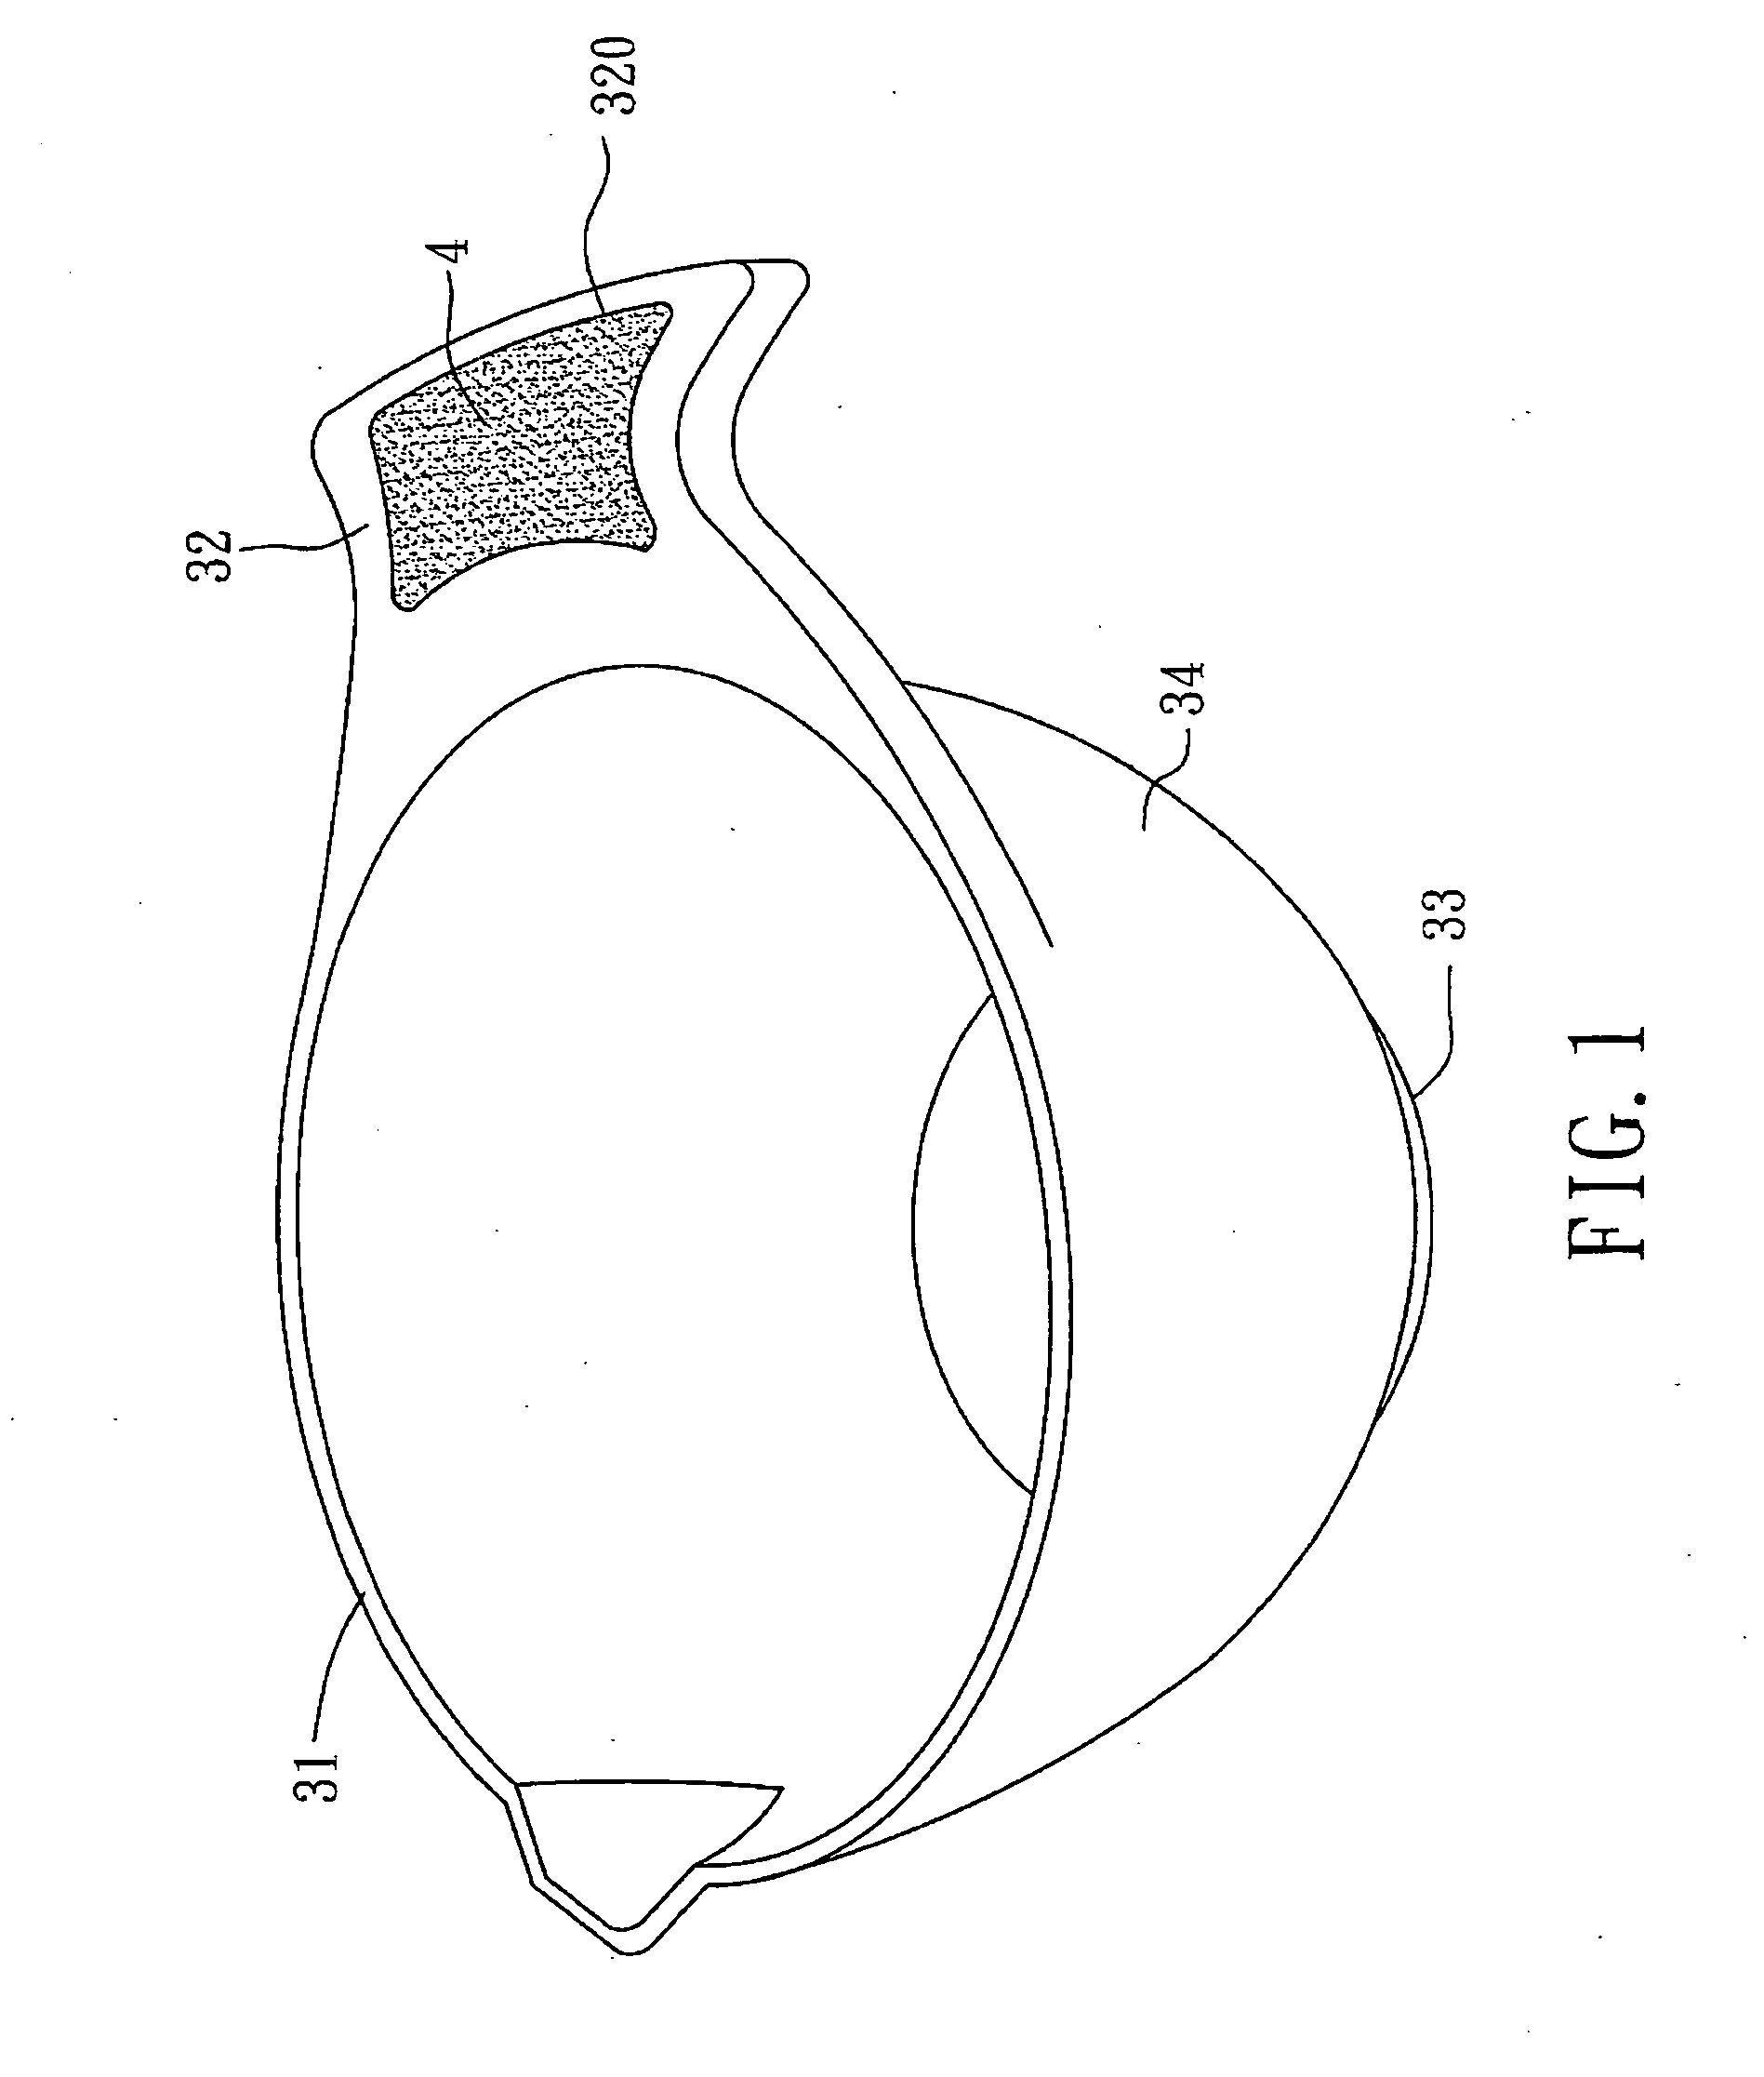 Container with anti-slip capability